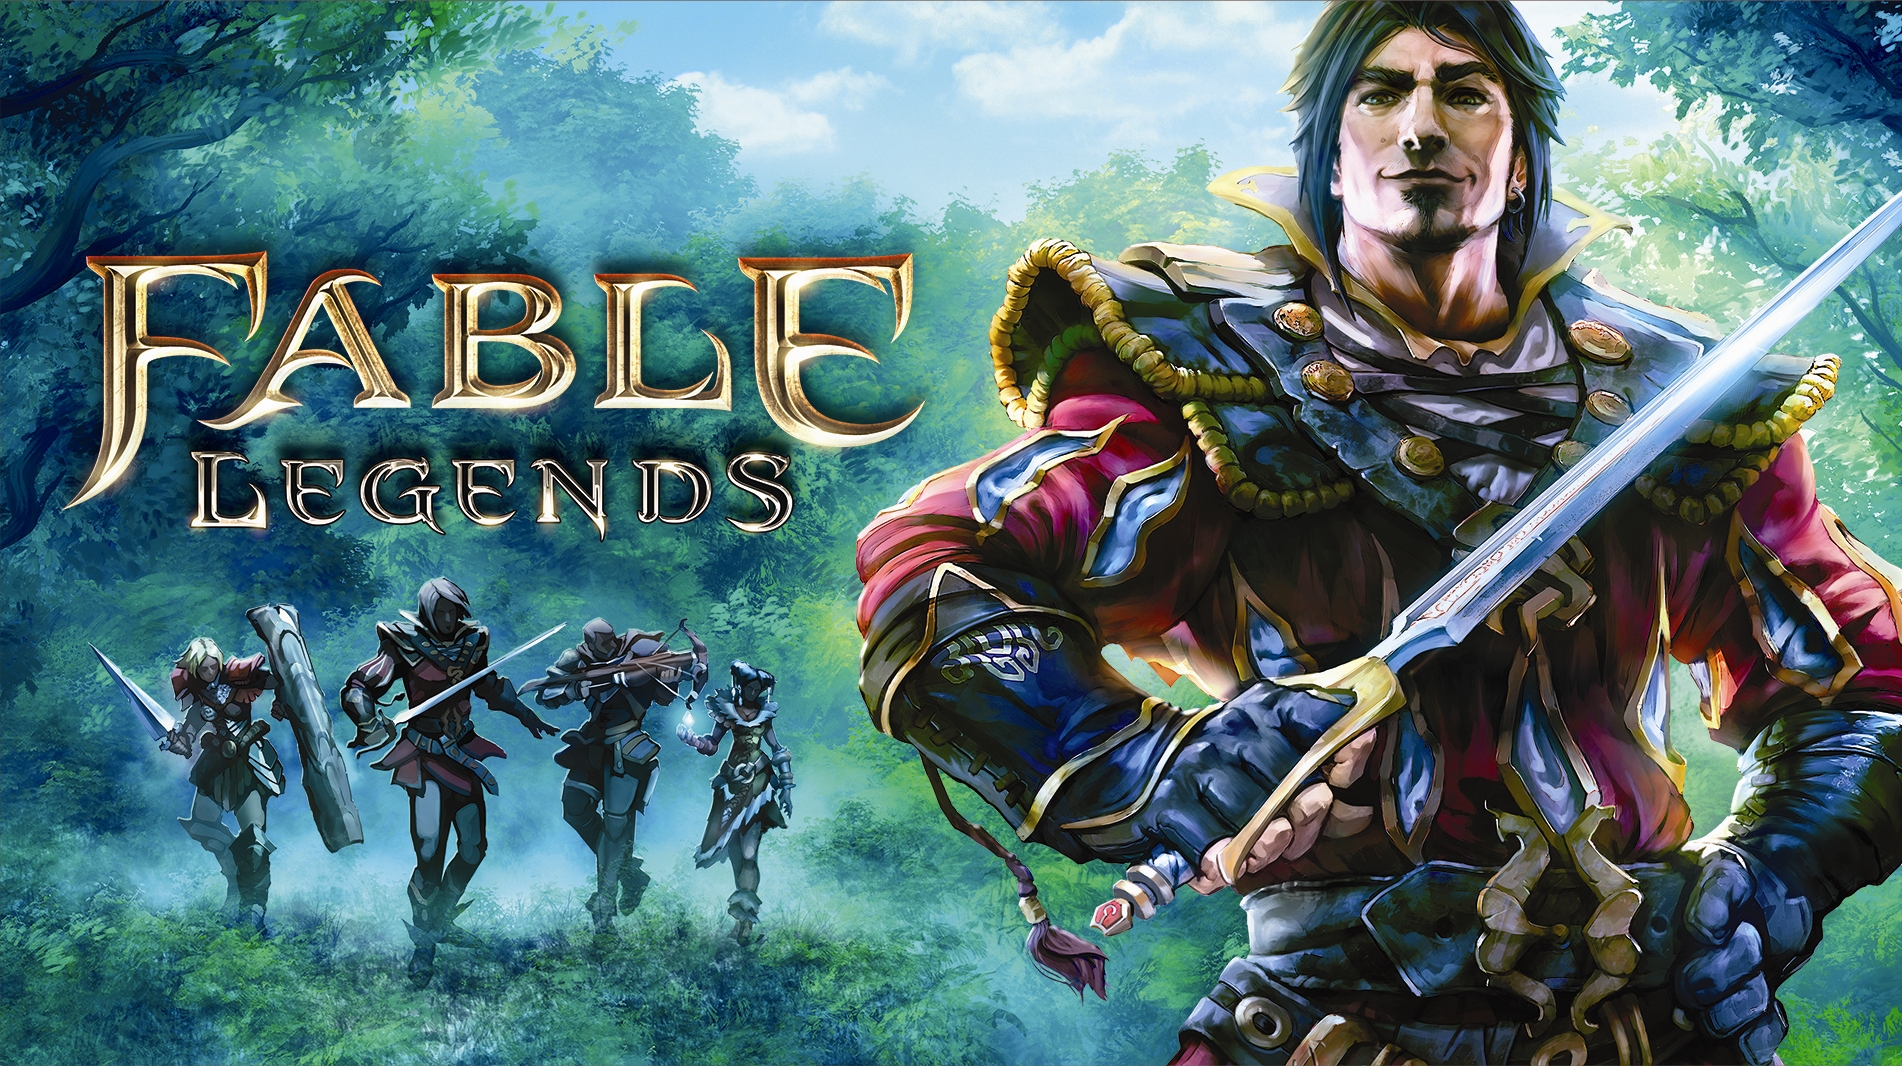 HQ Fable Legends Wallpapers | File 2067.79Kb